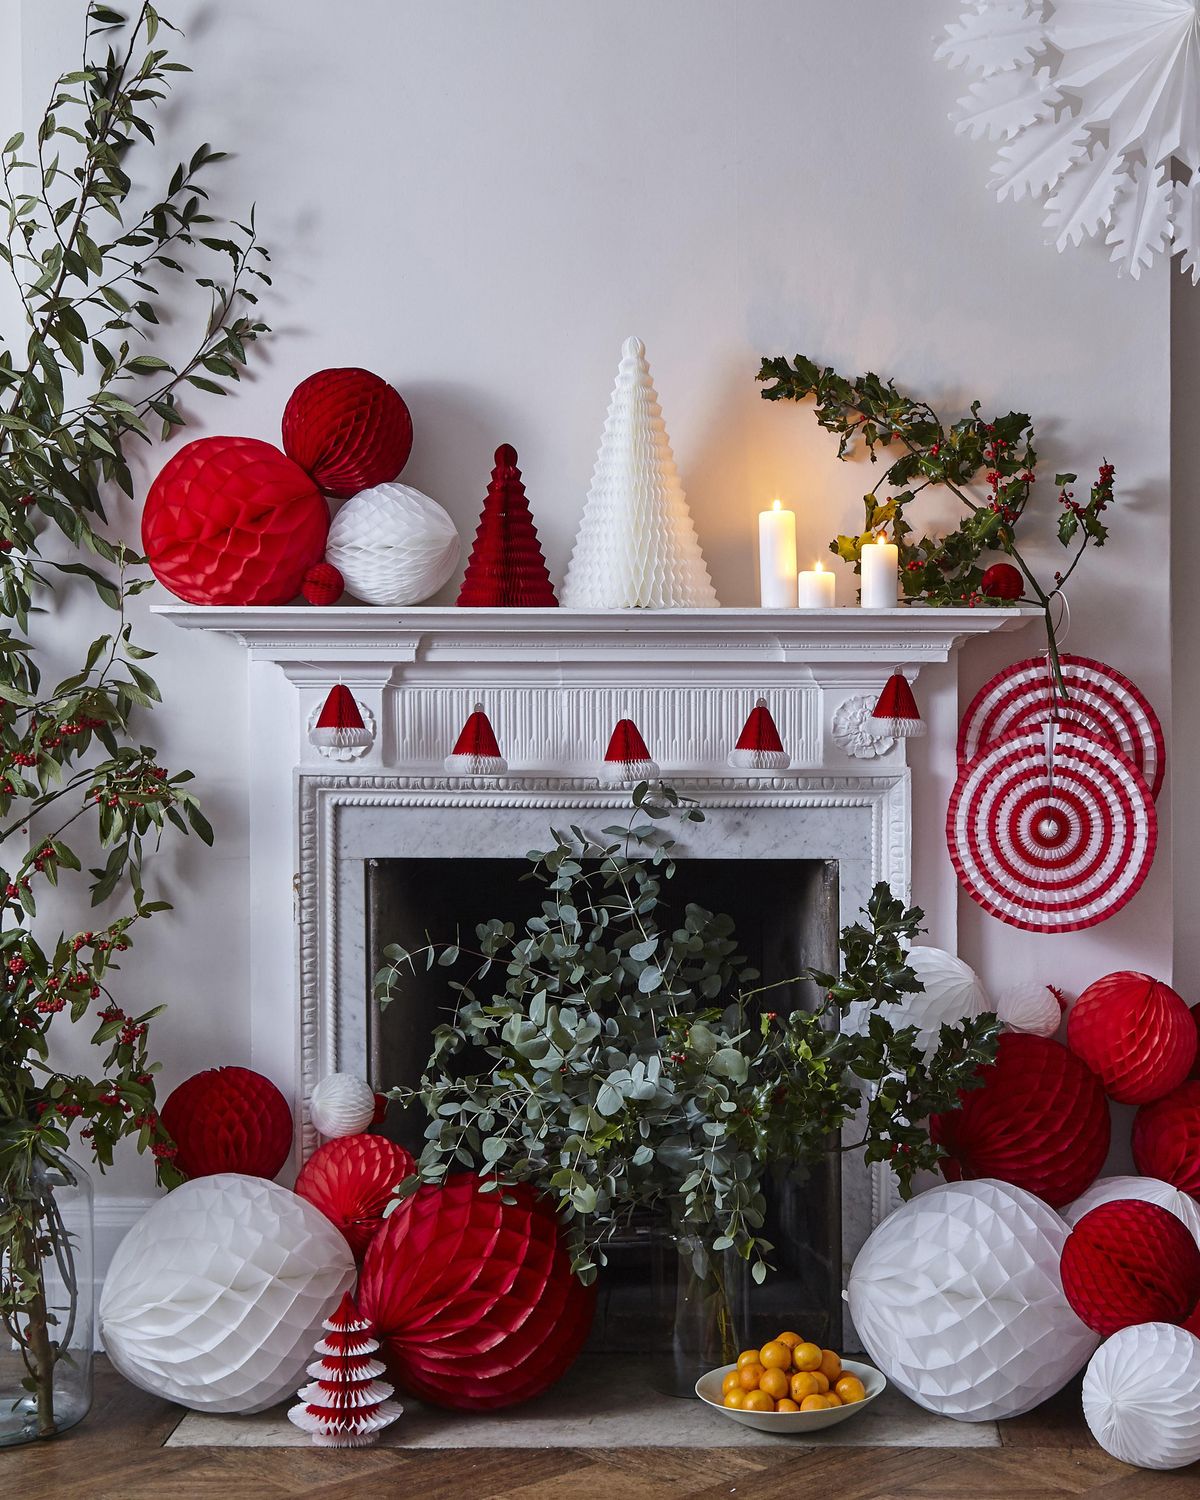 8 Quick And Easy Ways To Make Your Home Festive This